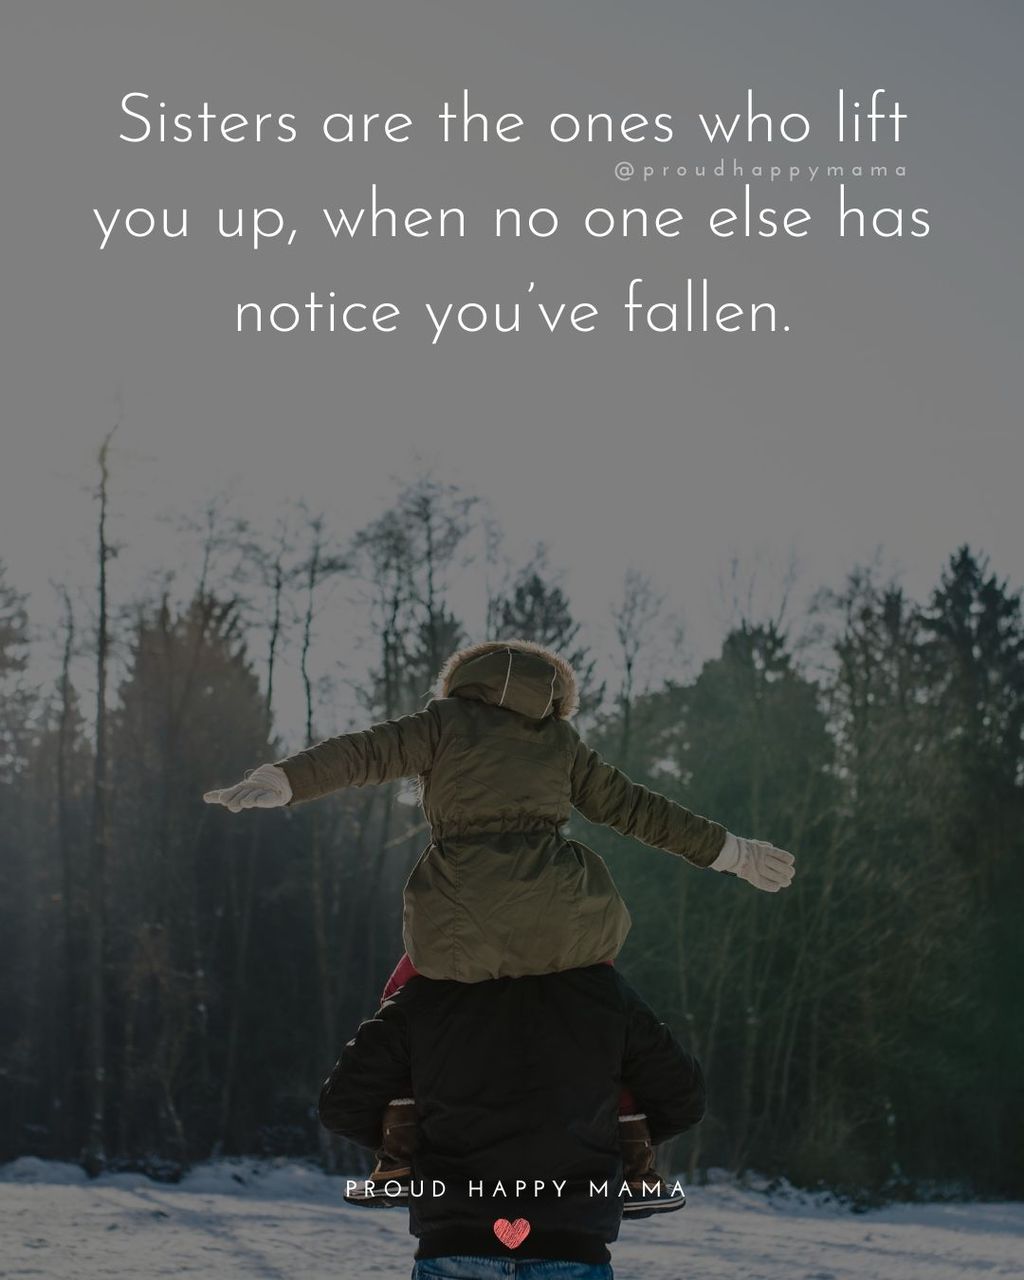 Sister Quotes - Sisters are the ones who lift you up, when no one else has notice youve fallen.